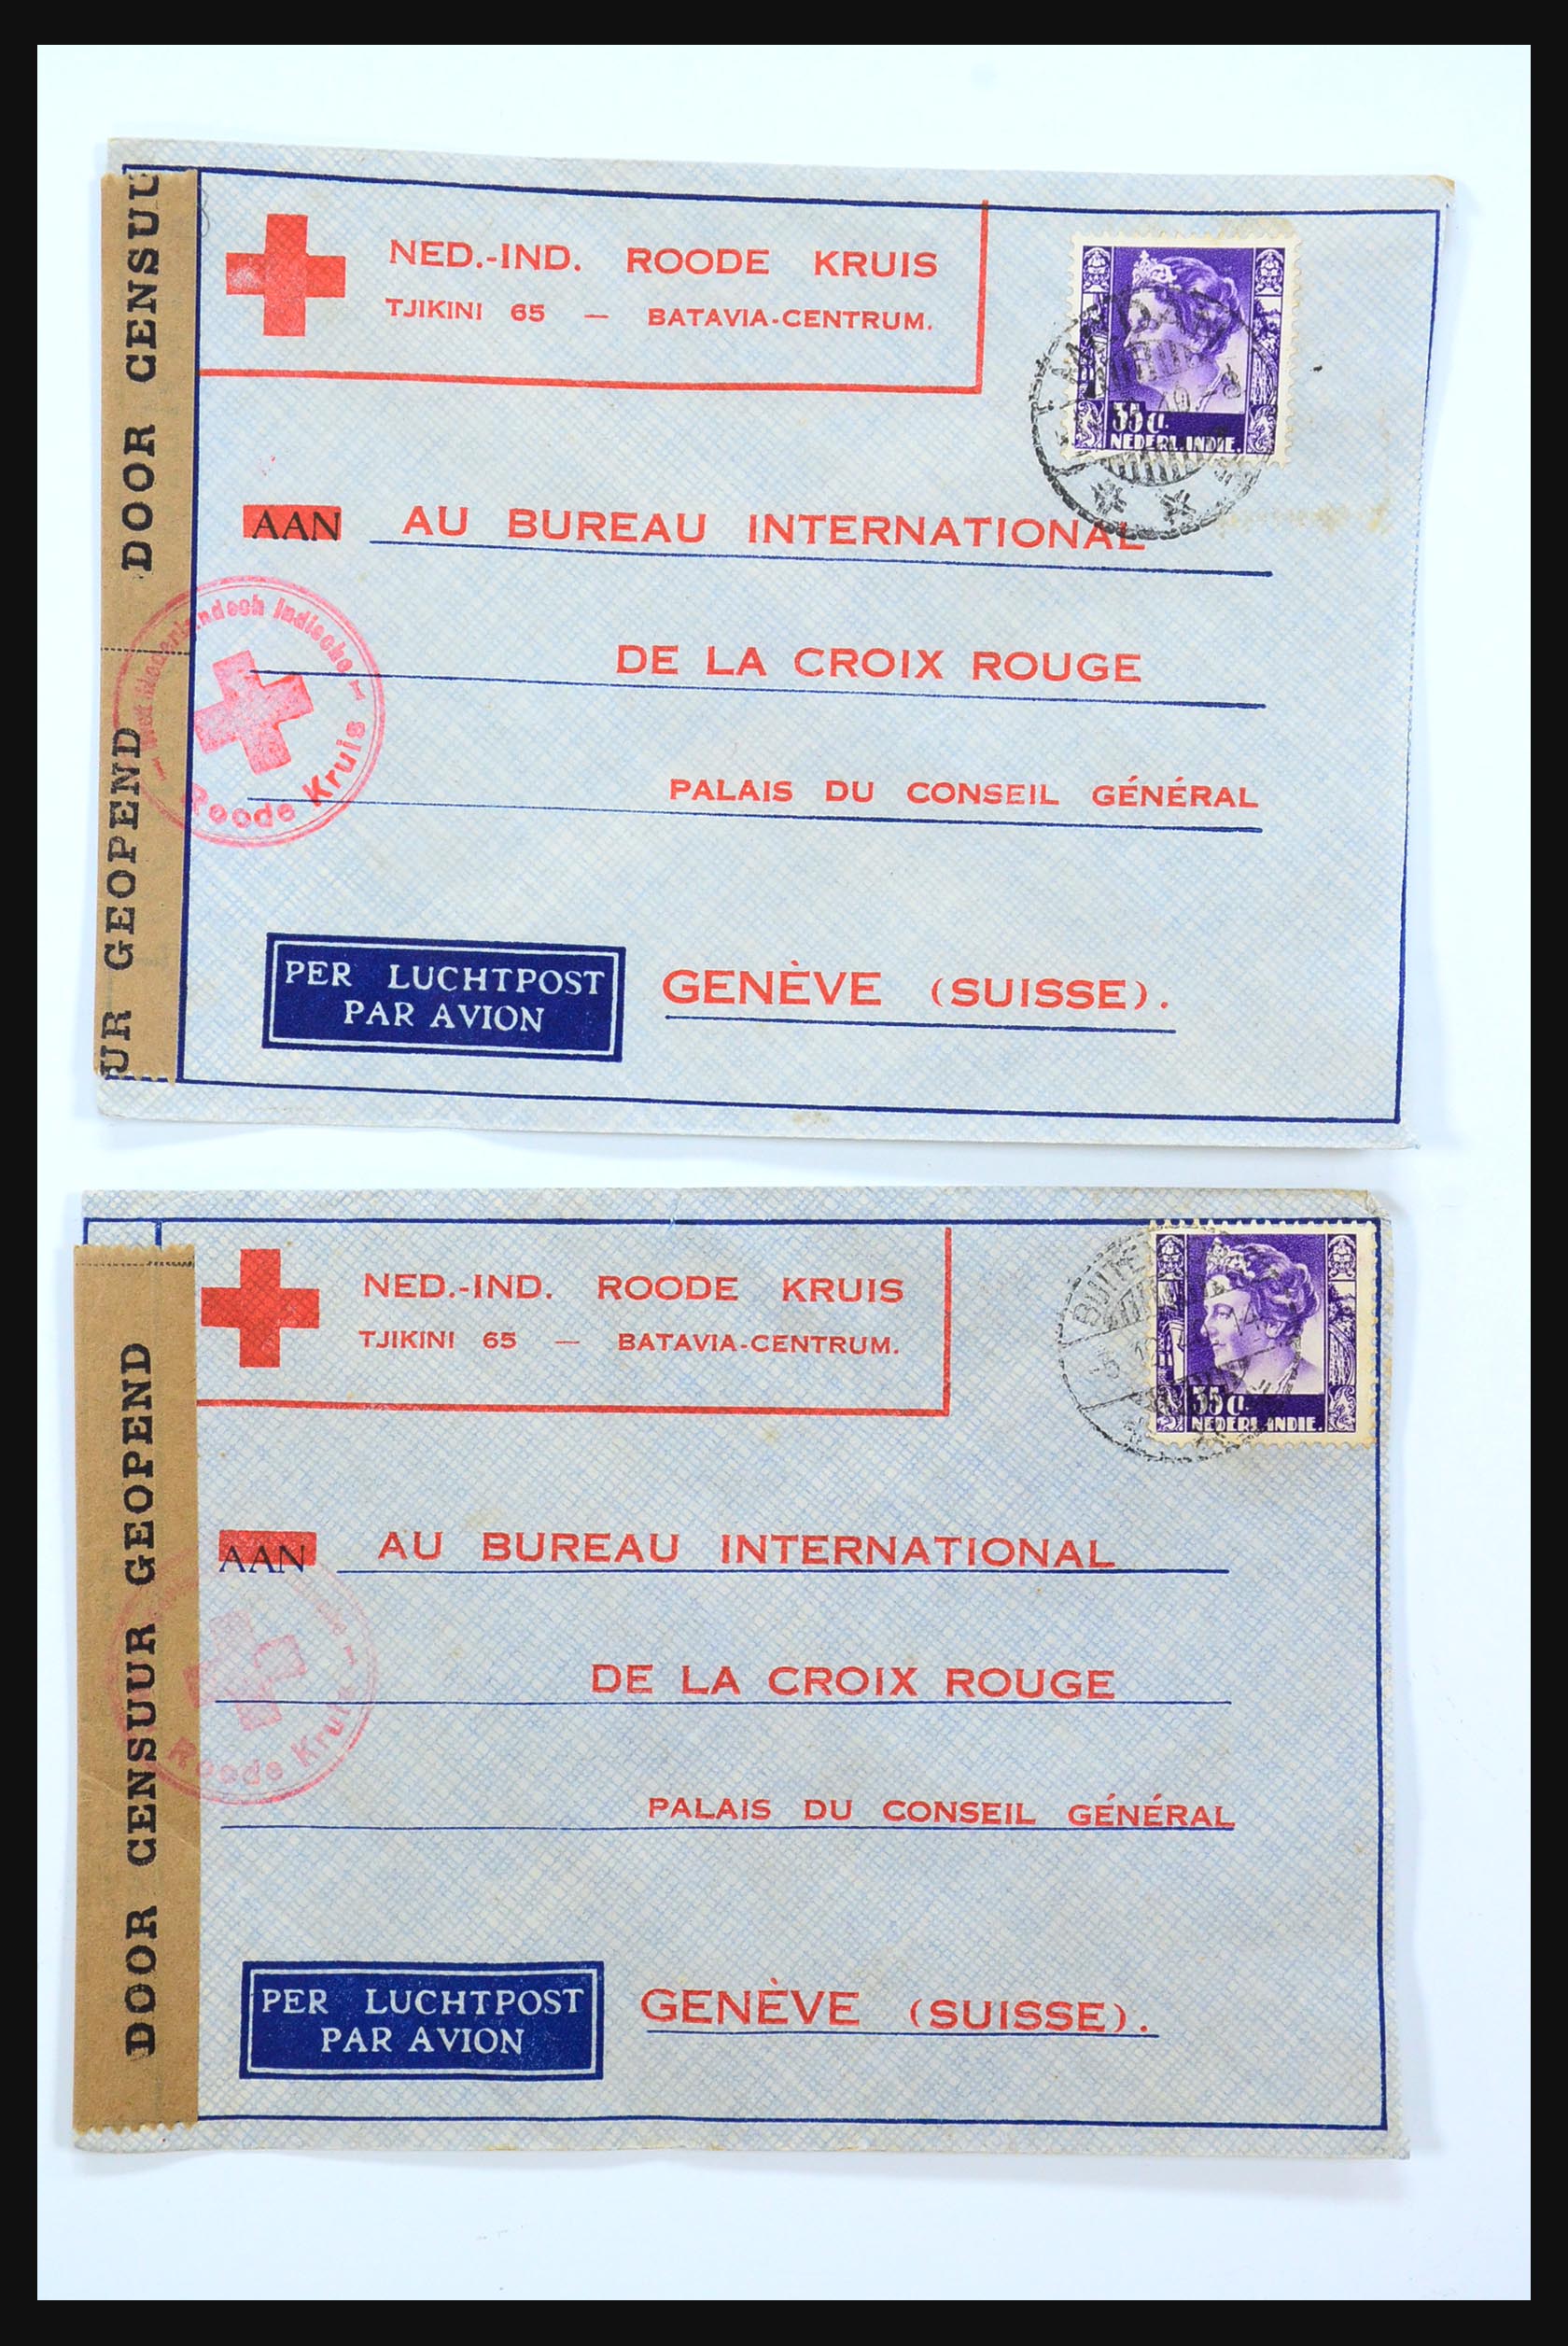 31362 081 - 31362 Netherlands Indies Japanese occupation covers 1942-1945.